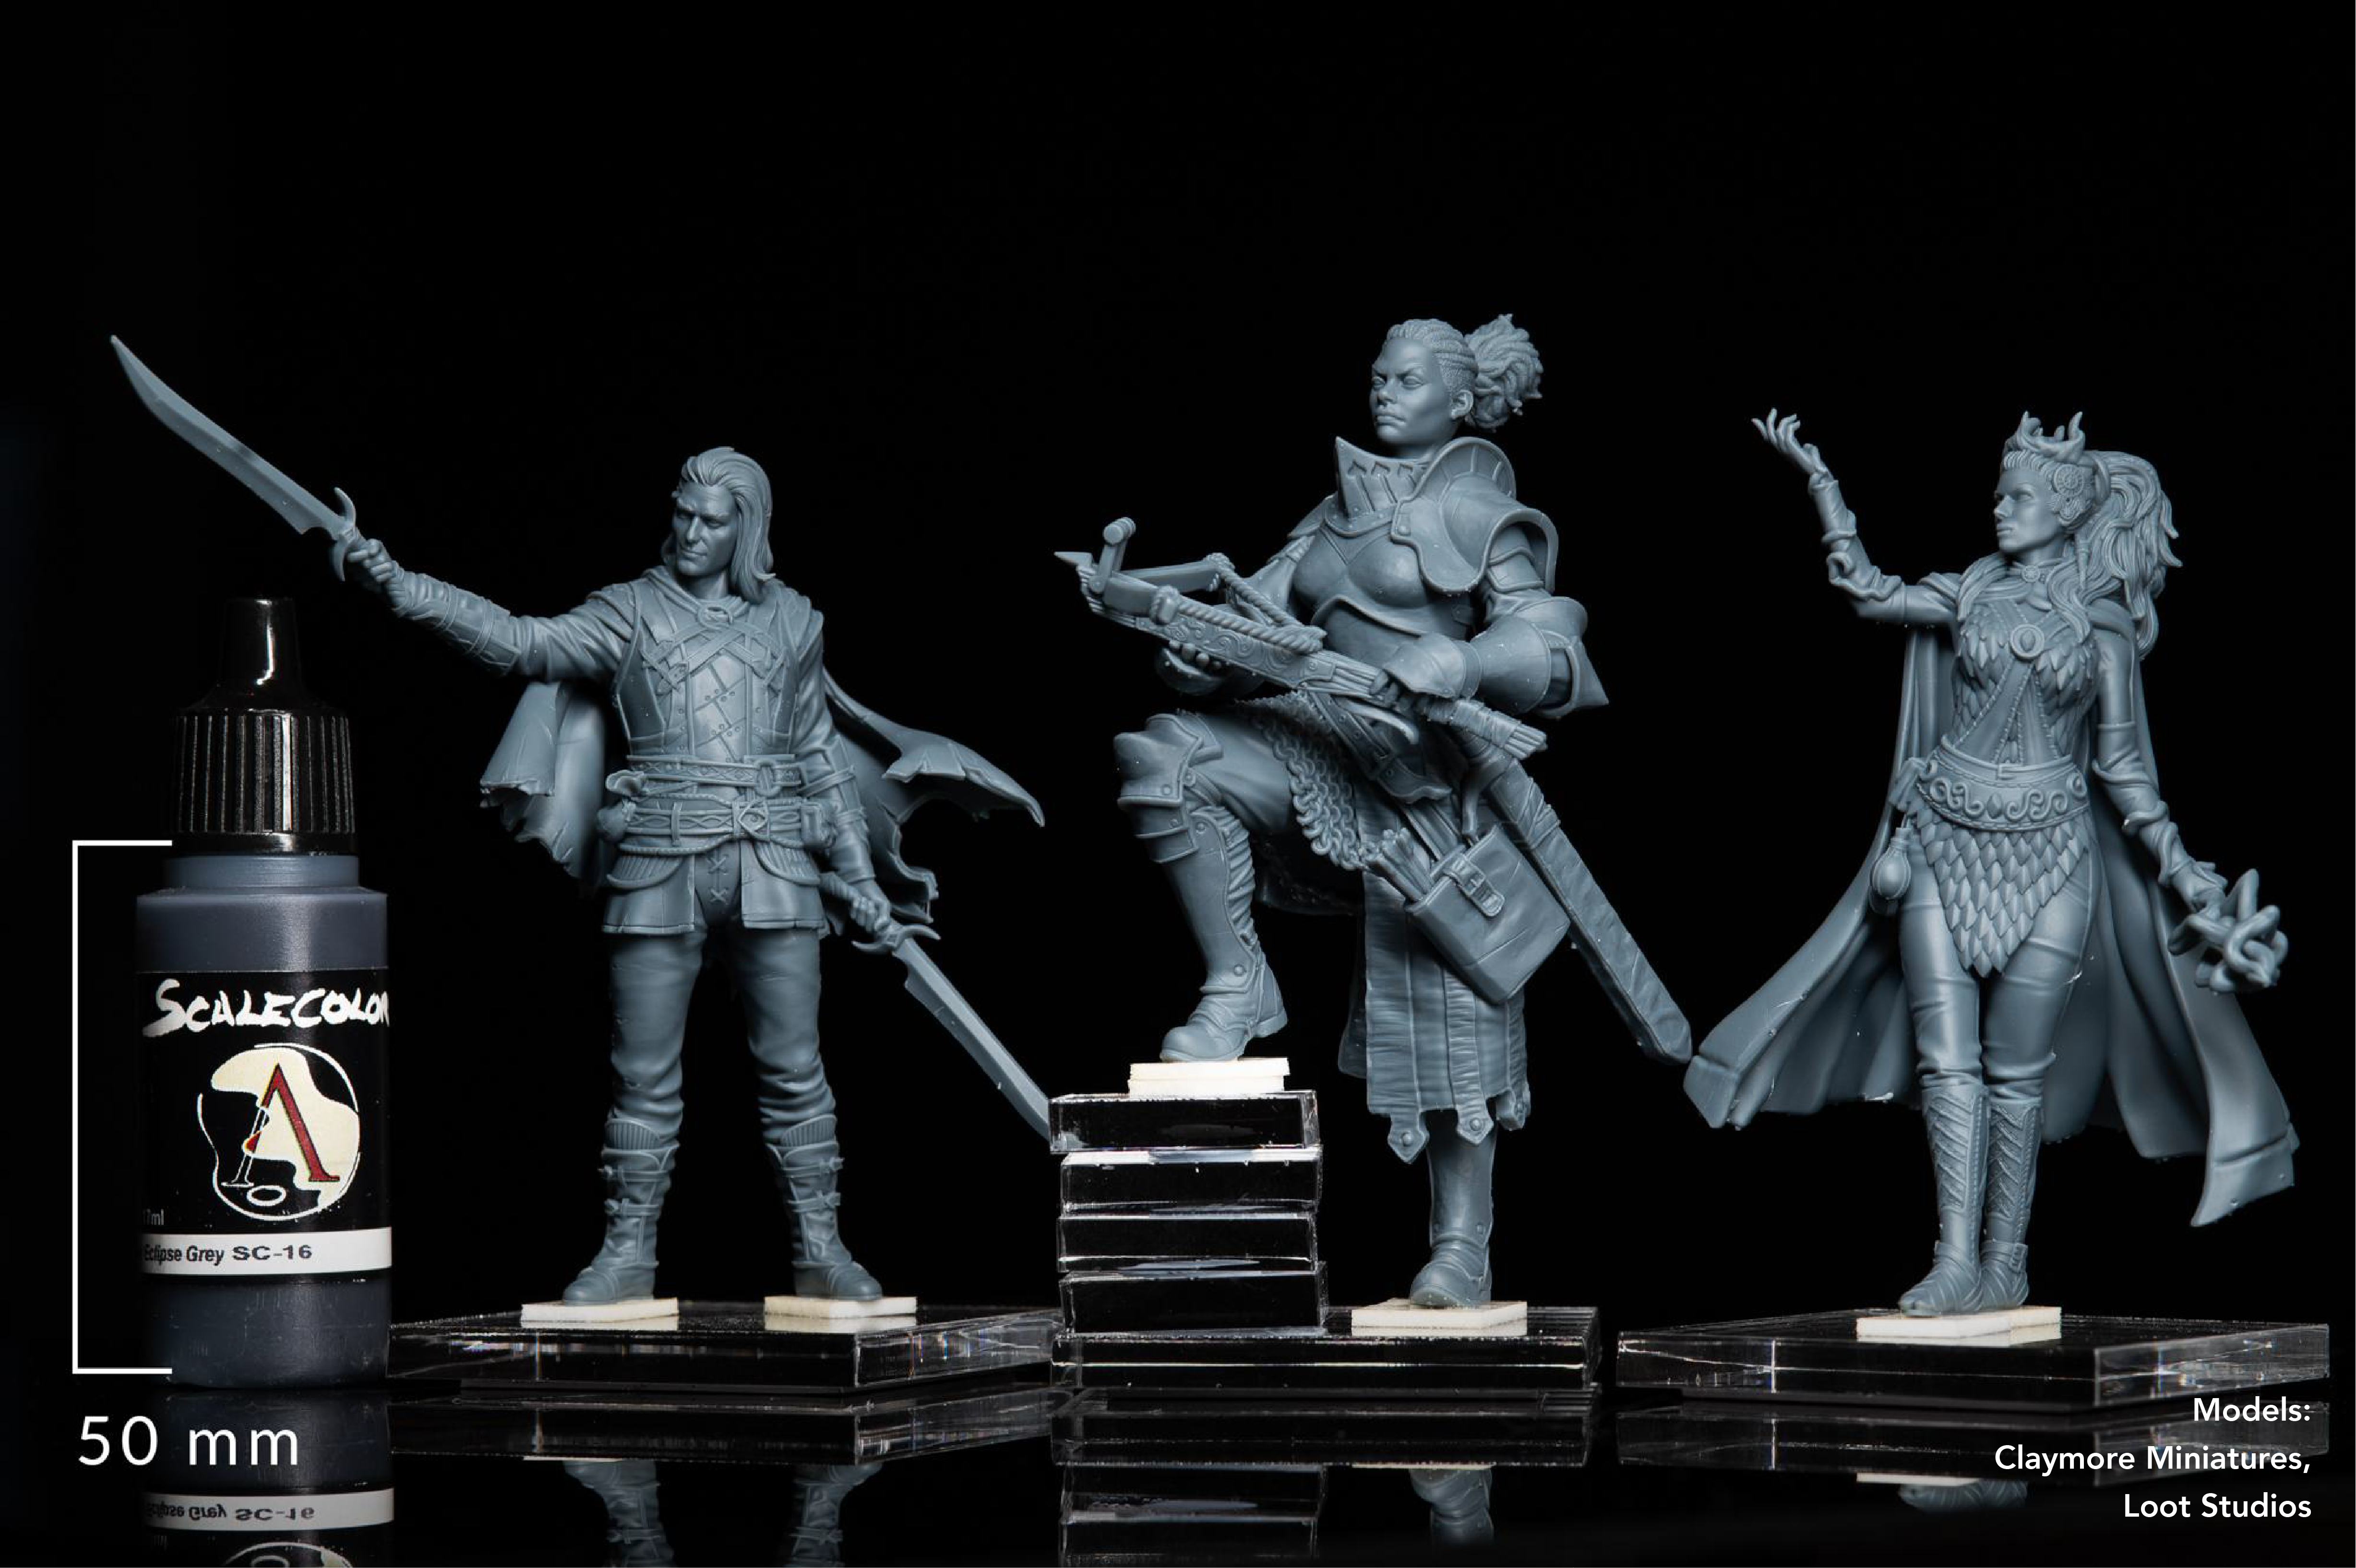 Models printed by Maria on Sonic Mini 8K S